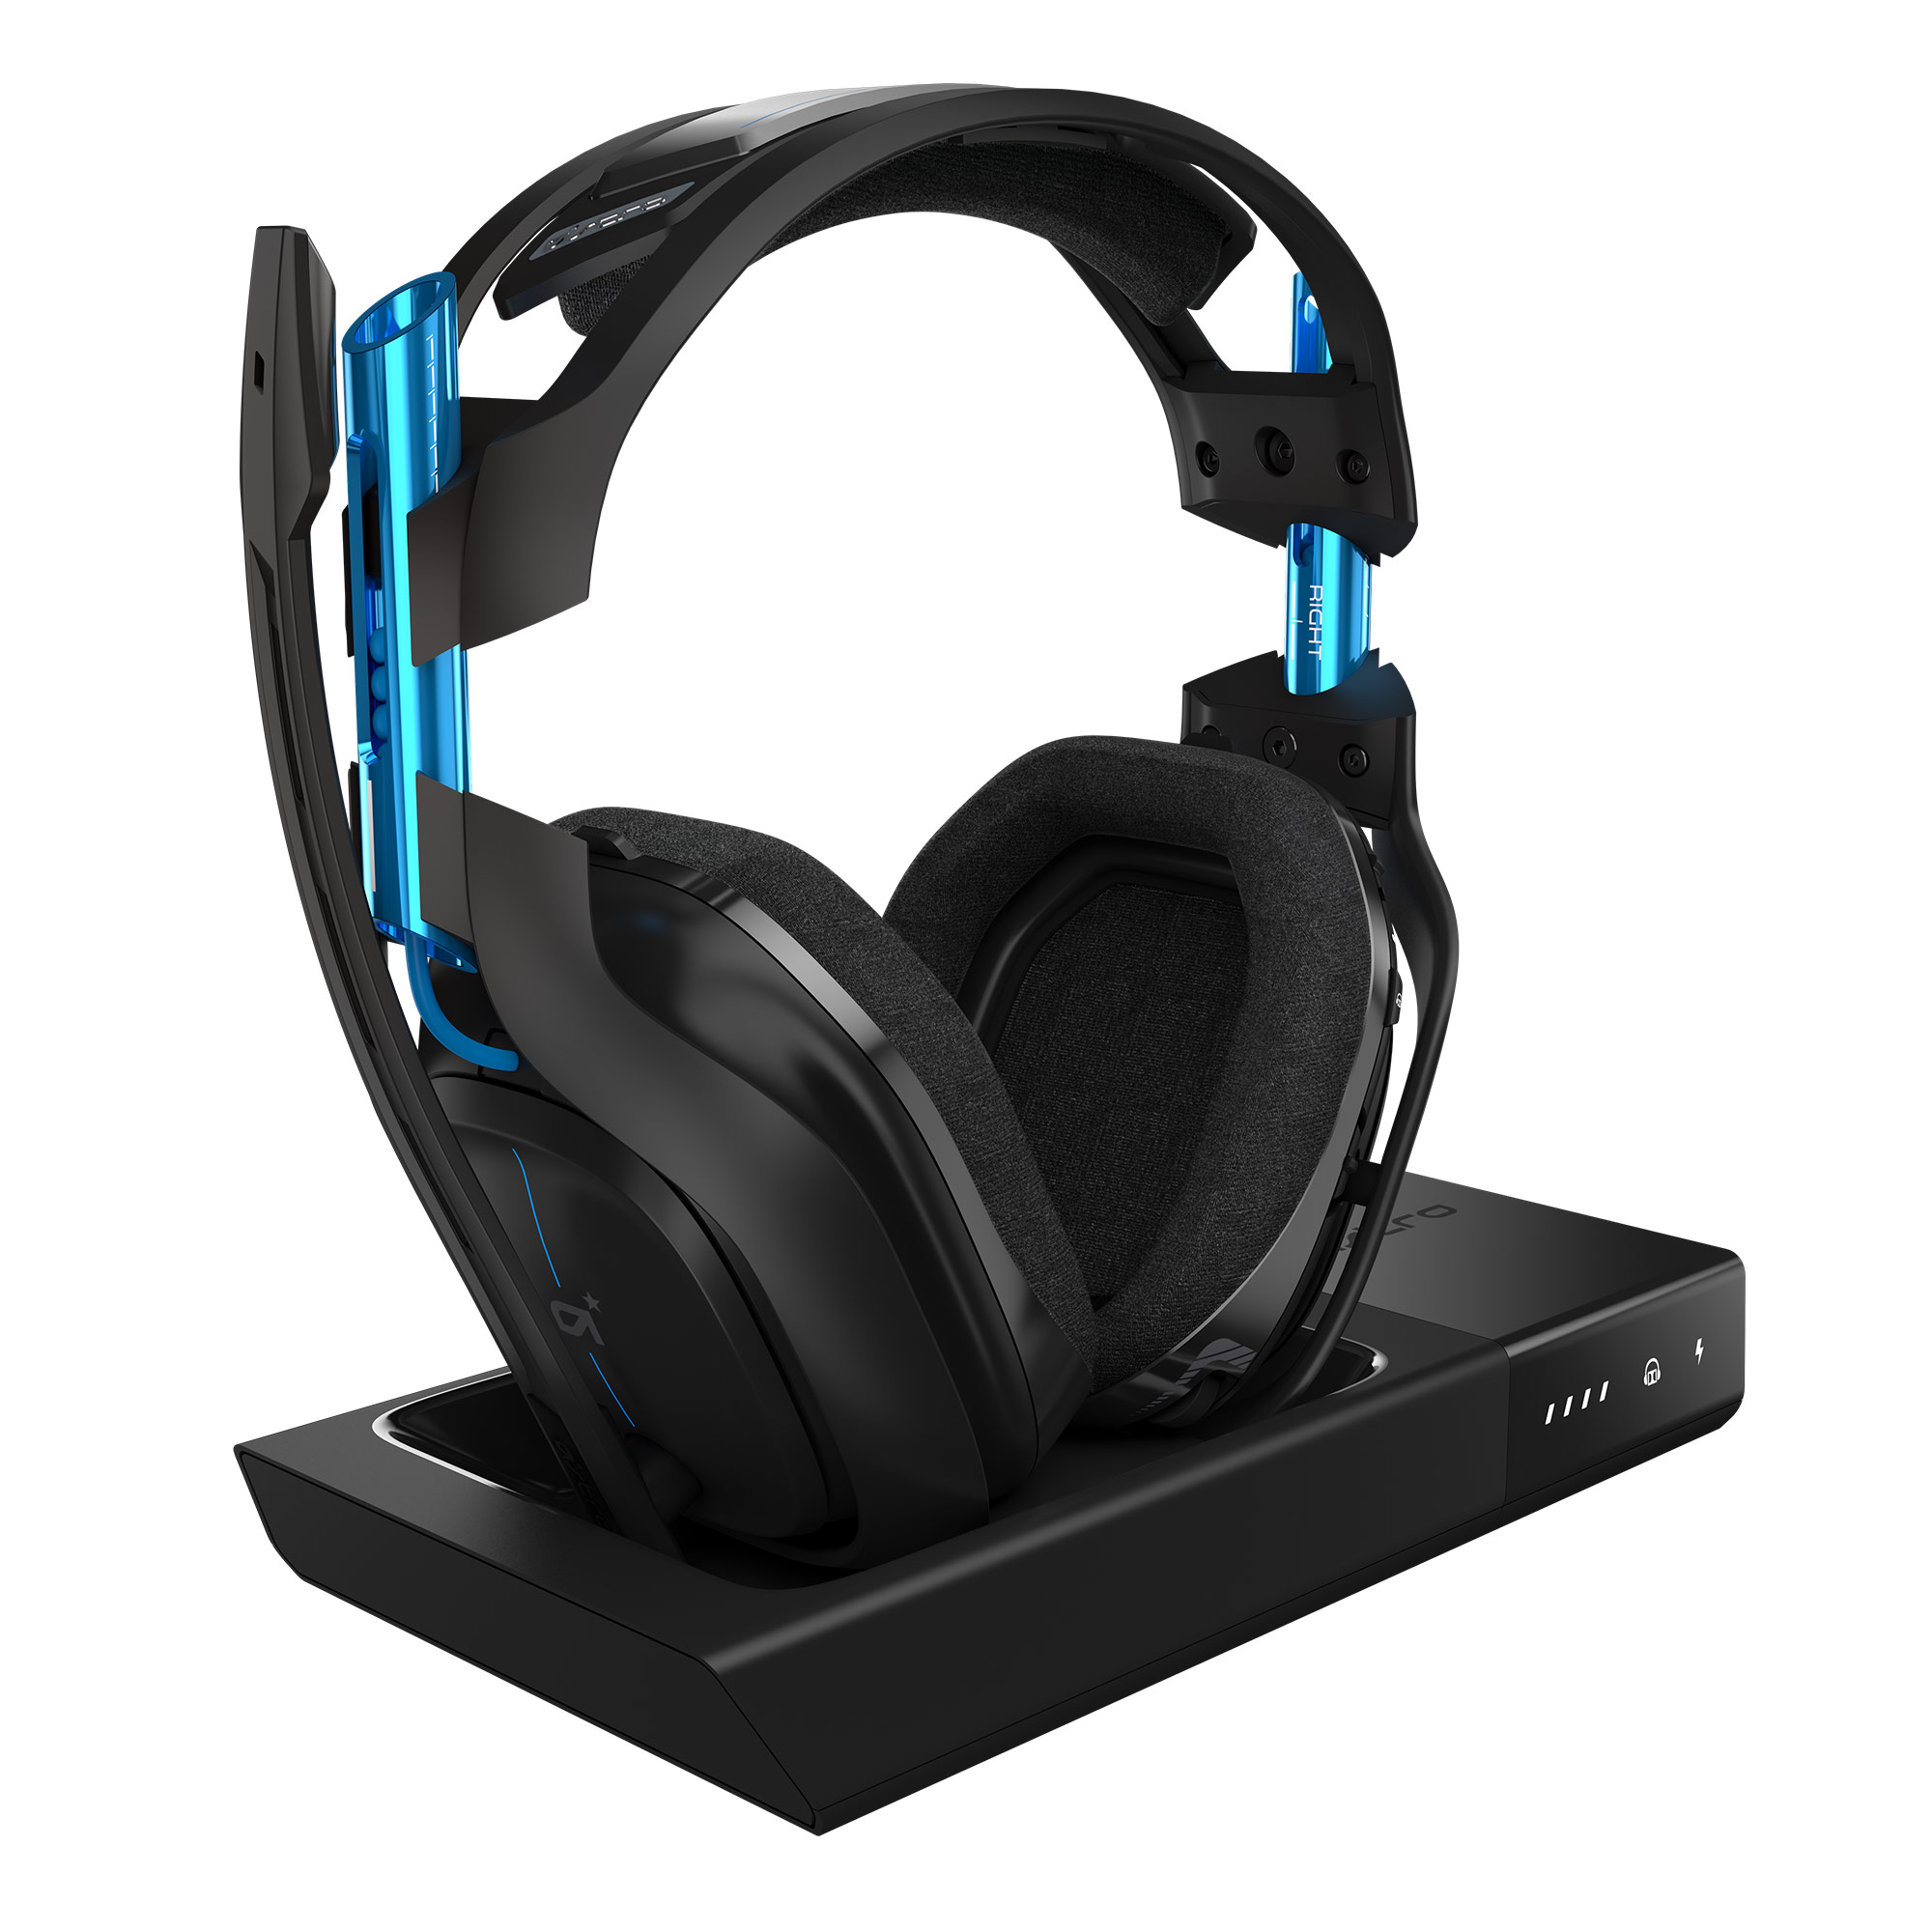 Astro A50 Wirelss Headset + Base Station